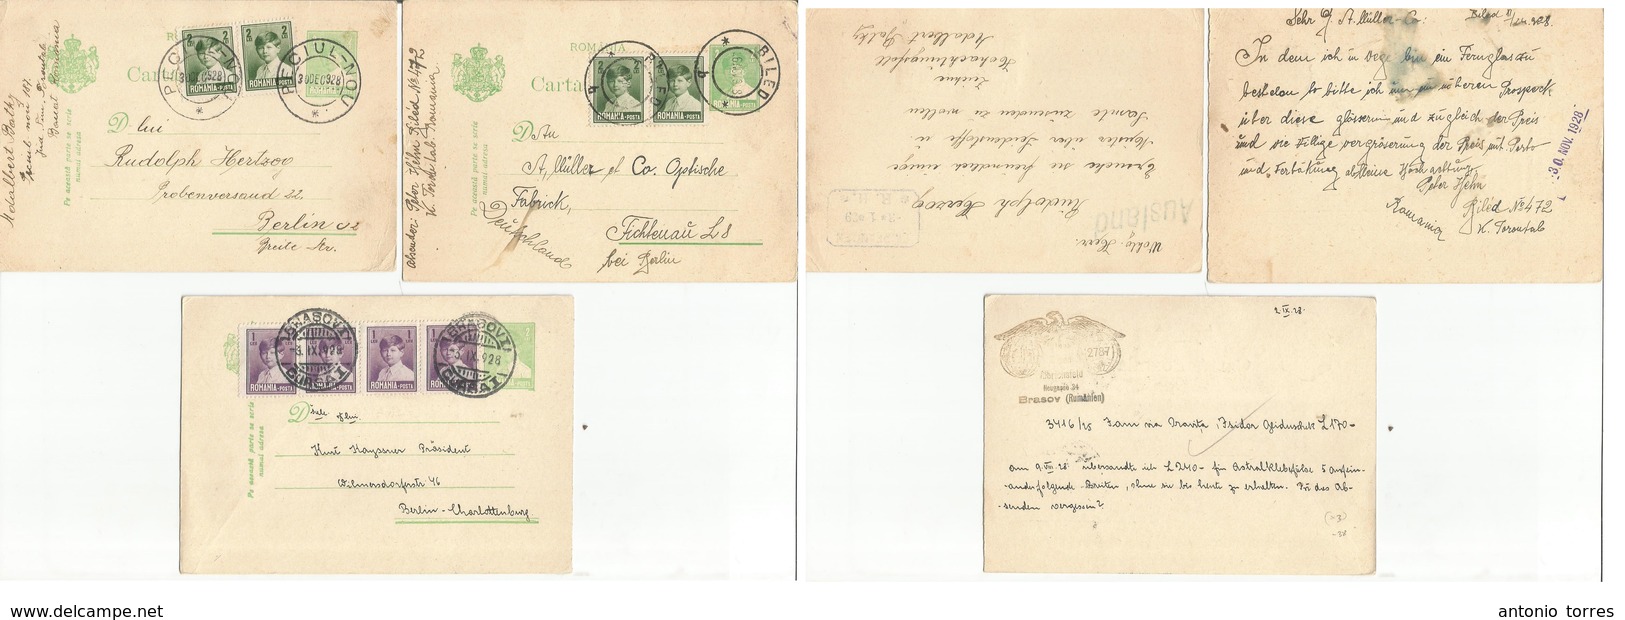 Romania. 1928. Three Diff 2 Lei Green Stat Cards + Adtls, Addressed To Germany. Cities: Biled, Reciul Nou, Brasovi. - Other & Unclassified